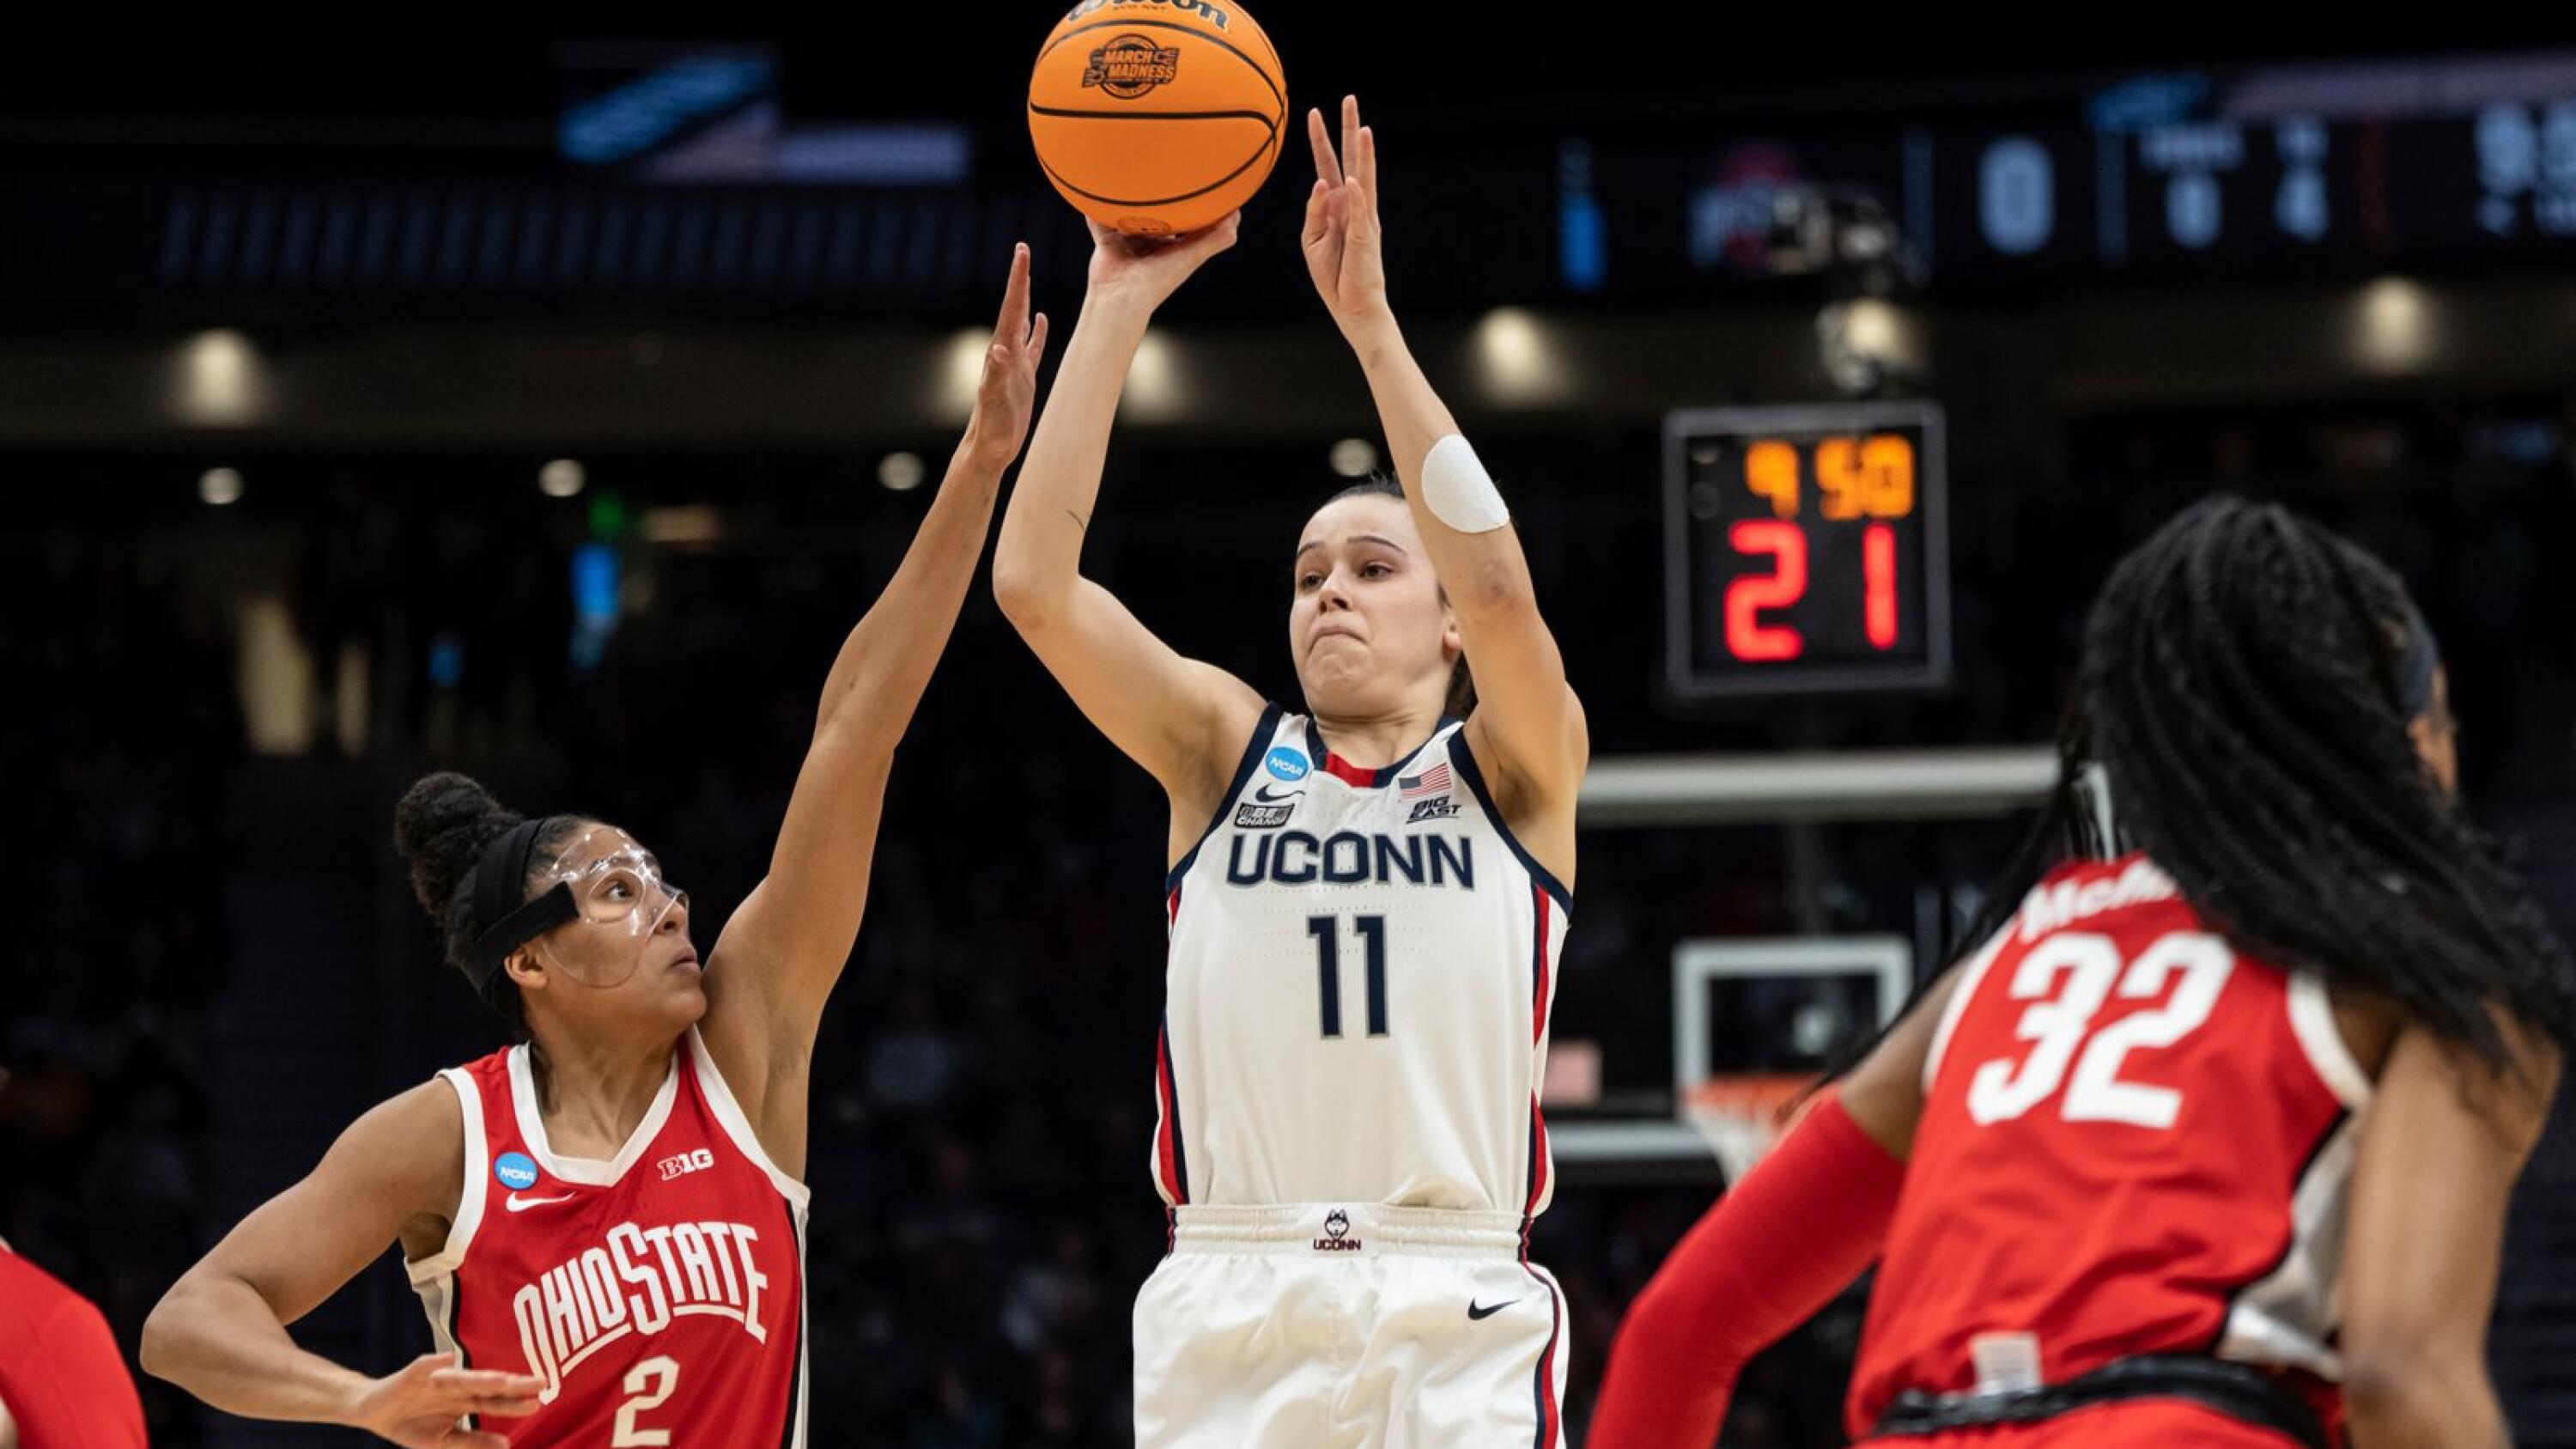 March Madness: Ohio State overwhelms UConn, snaps Huskies' 14